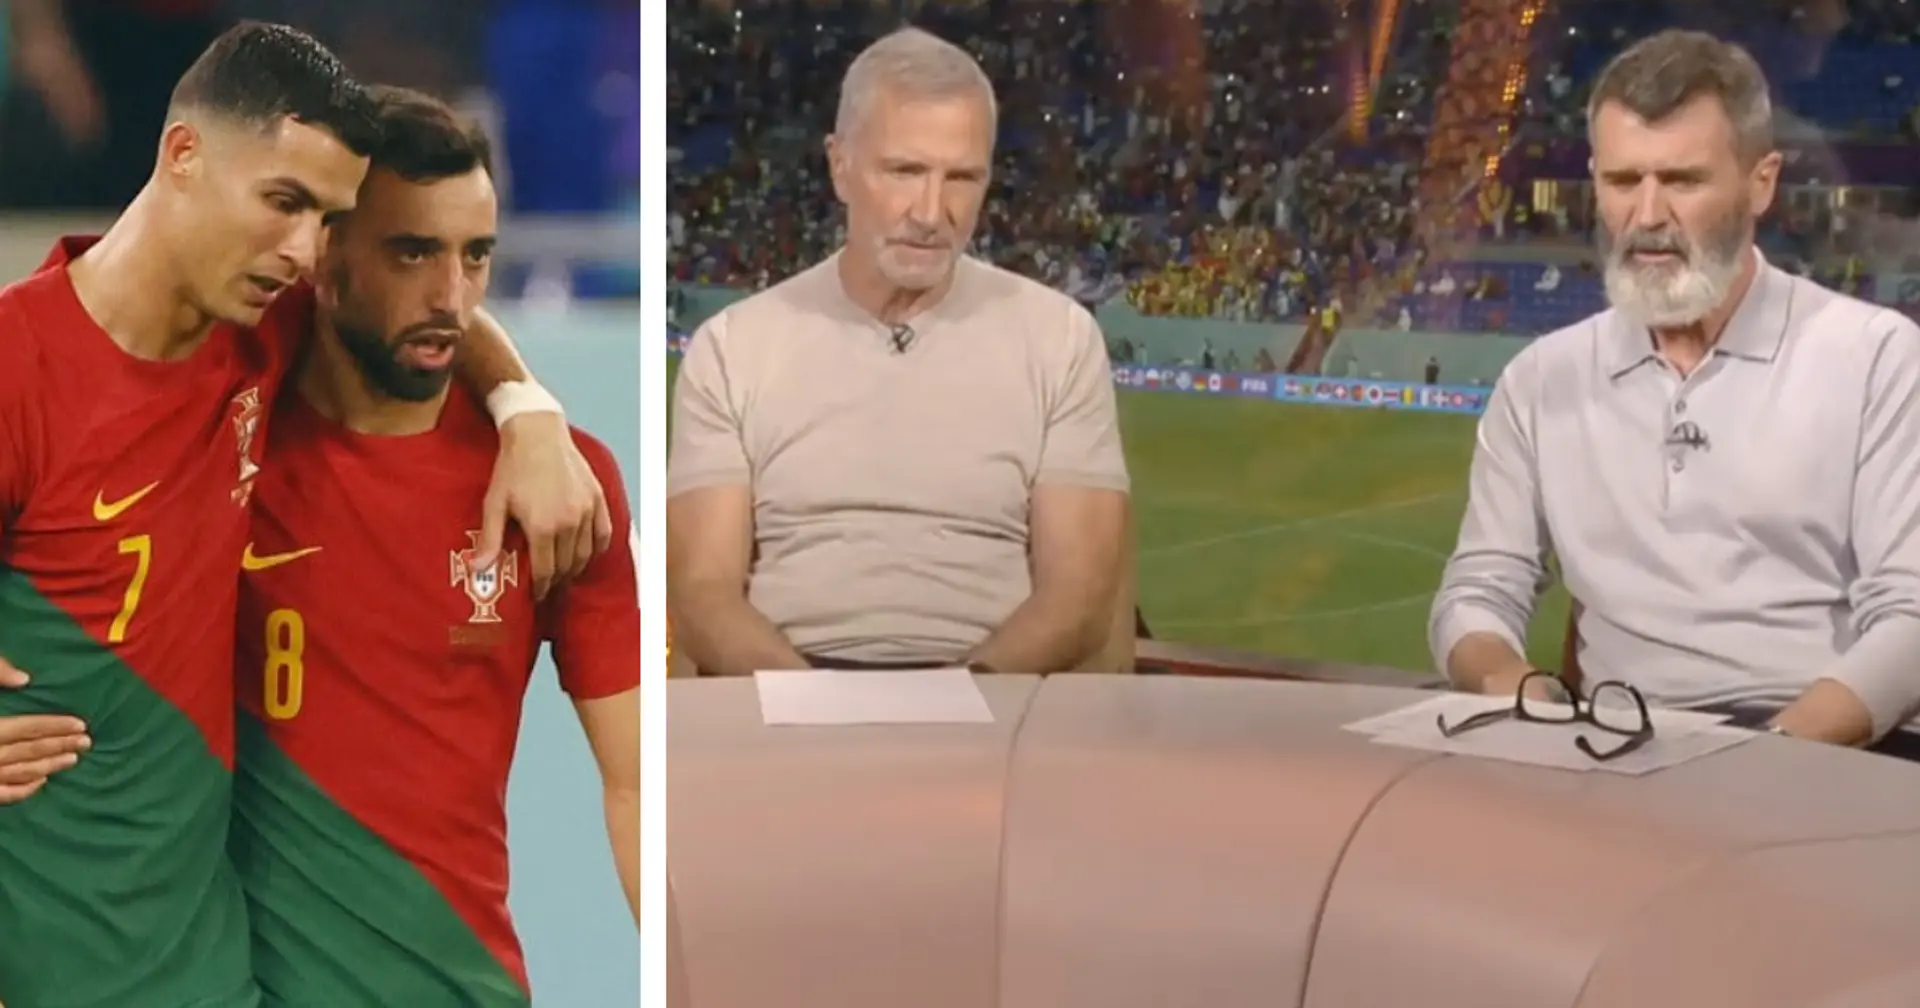 'Top players don't do that': Graeme Souness and Roy Keane agree on Bruno Fernandes assessment